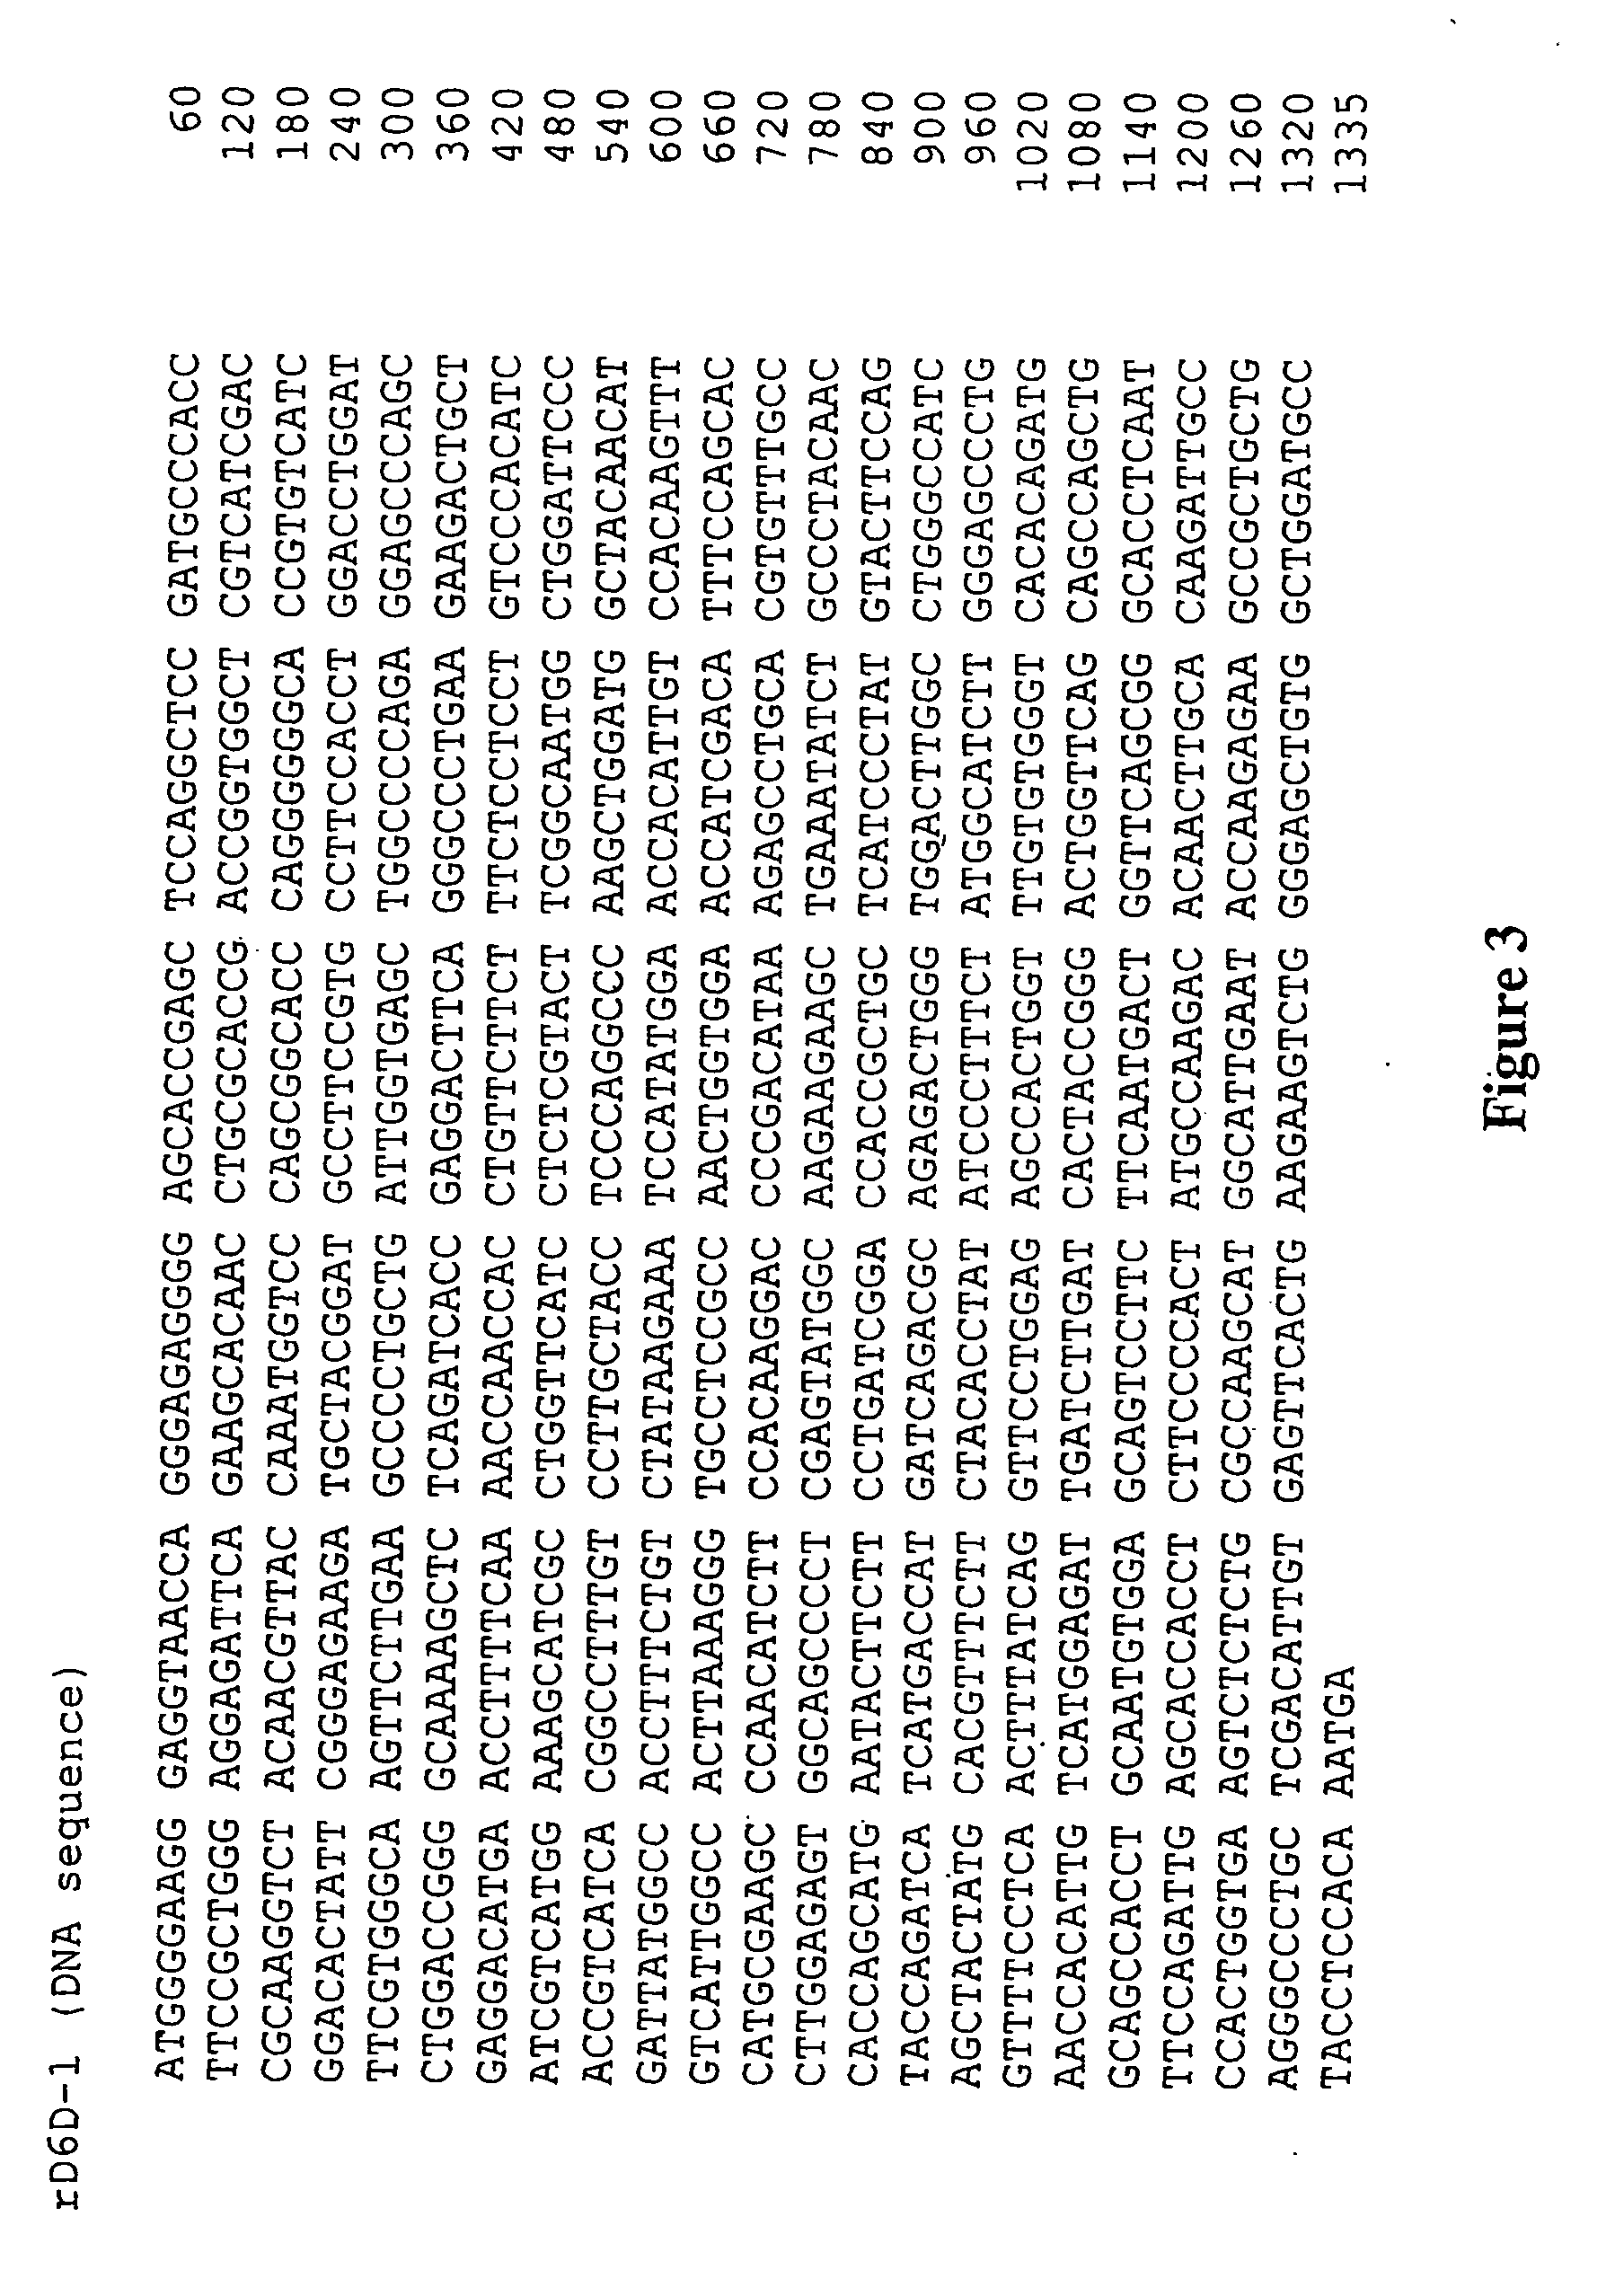 Polynucletides that control delta-6 desaturase genes and methods for identifying compounds for modulating delta-6 desaturase